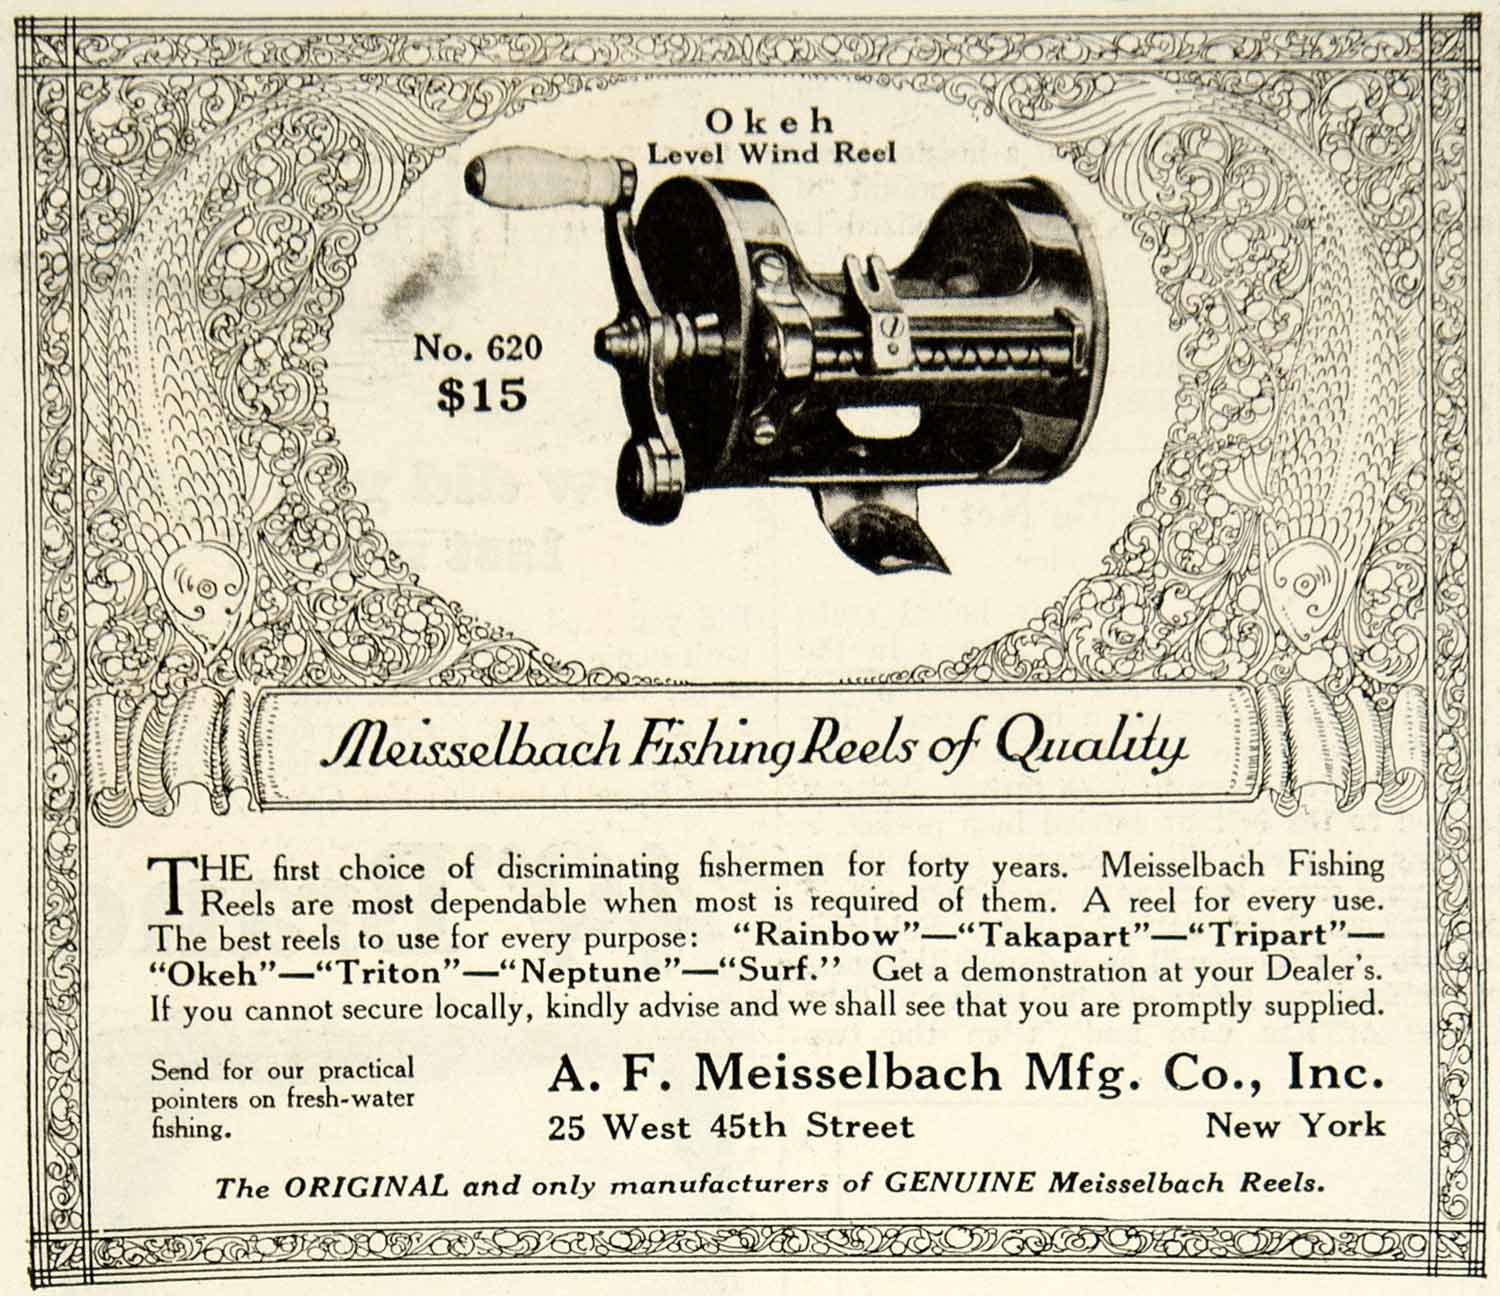 1925 Ad AF Meisselbach Fishing Reel 25 W 45th St NYC Bait Tackle Sport –  Period Paper Historic Art LLC